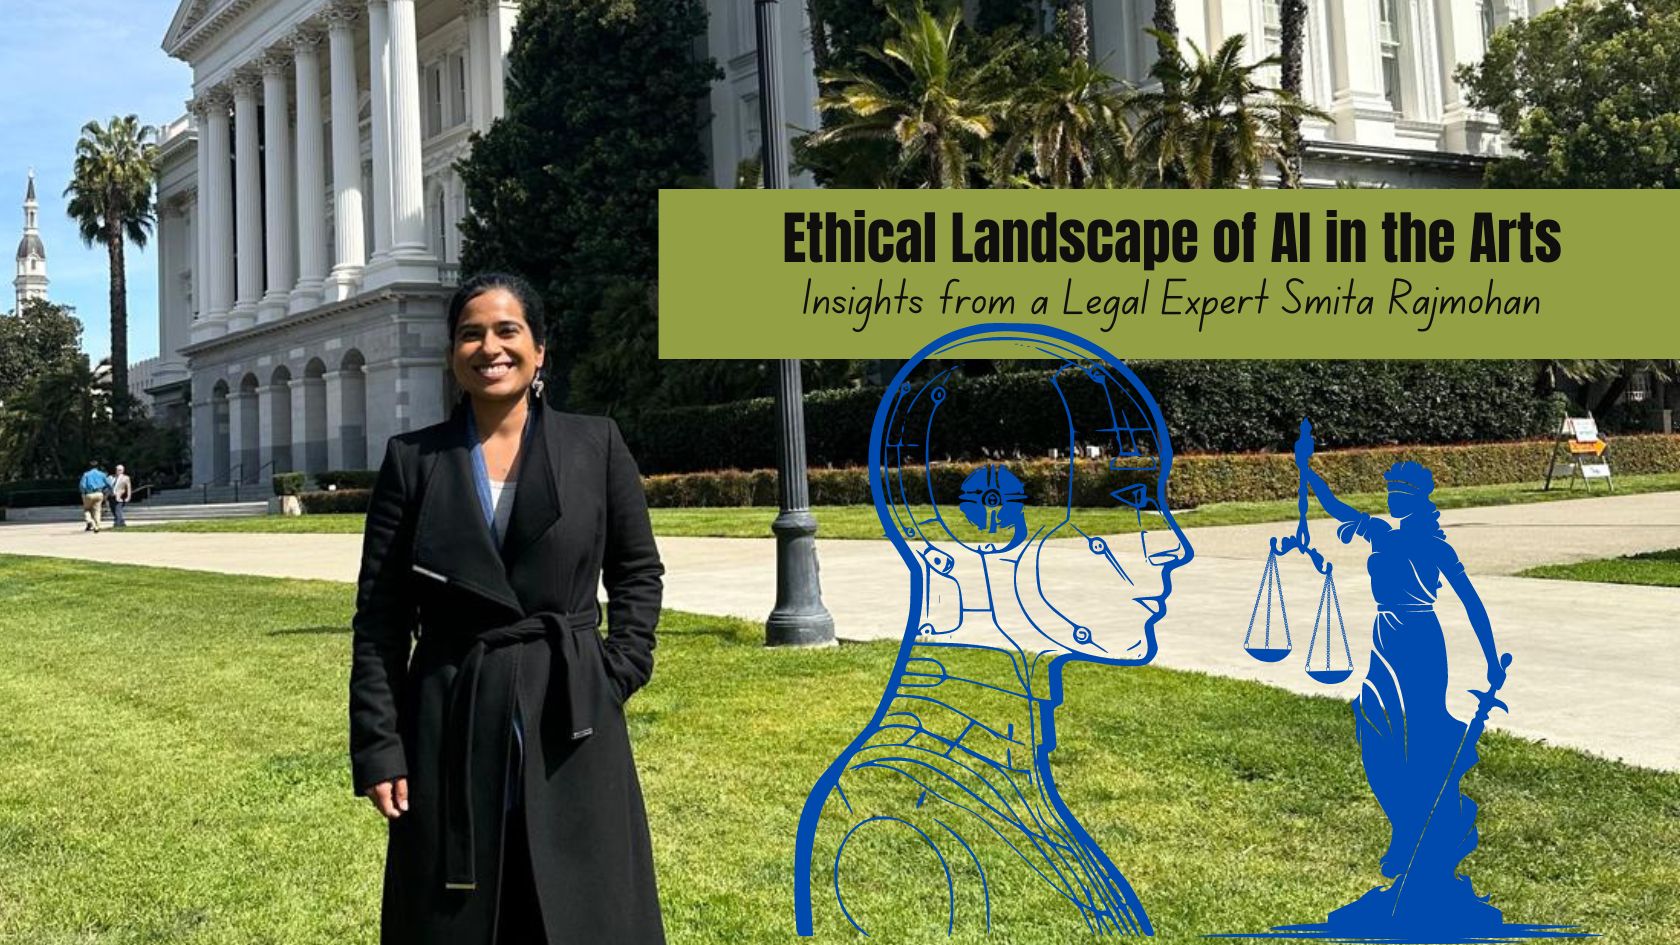 Ethical Landscape of AI in the Arts: Insights from a Legal Expert Smita Rajmohan